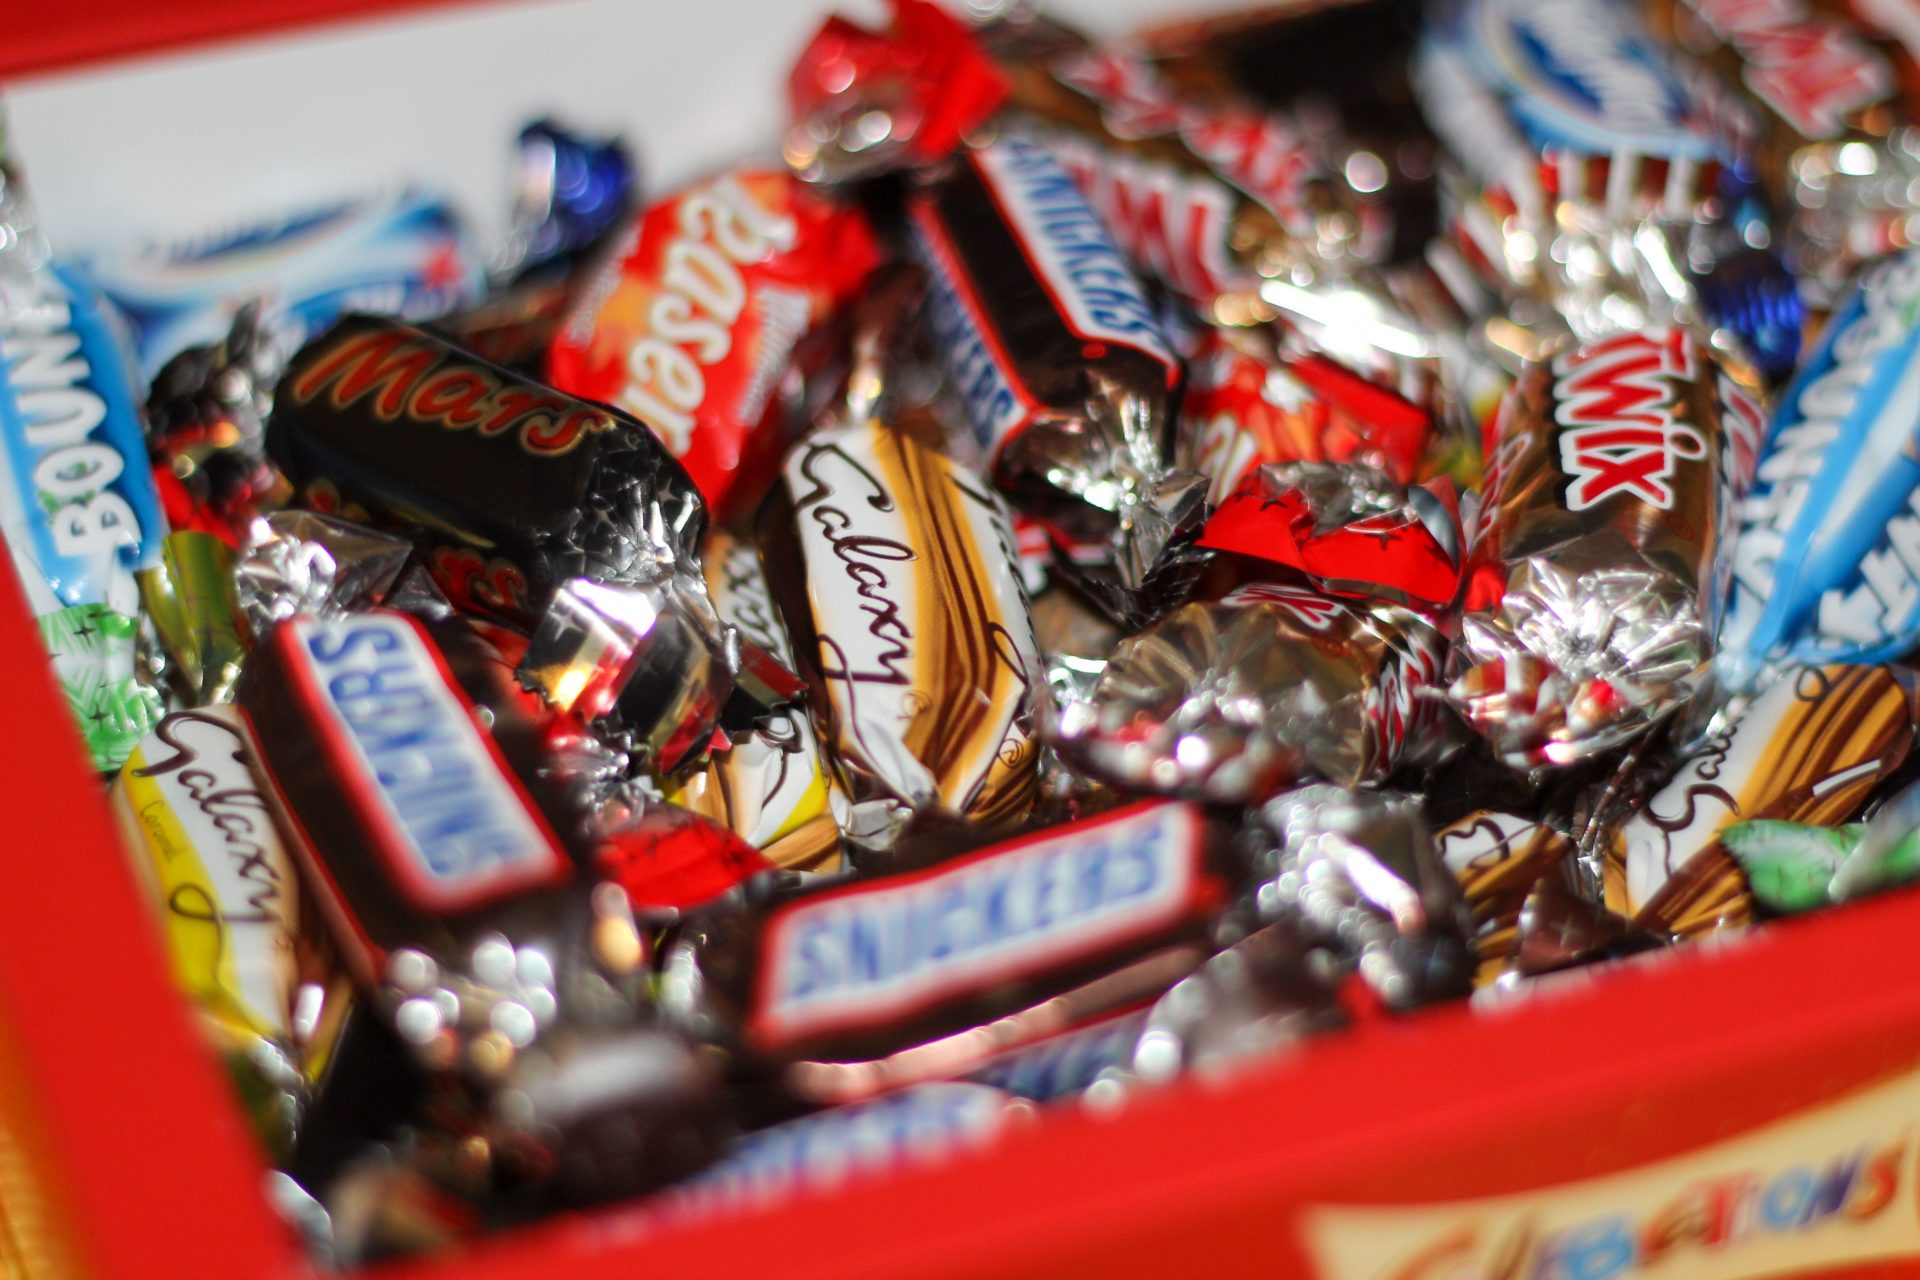 A mix of Celebrations chocolates in a gift box. Image: Alamy